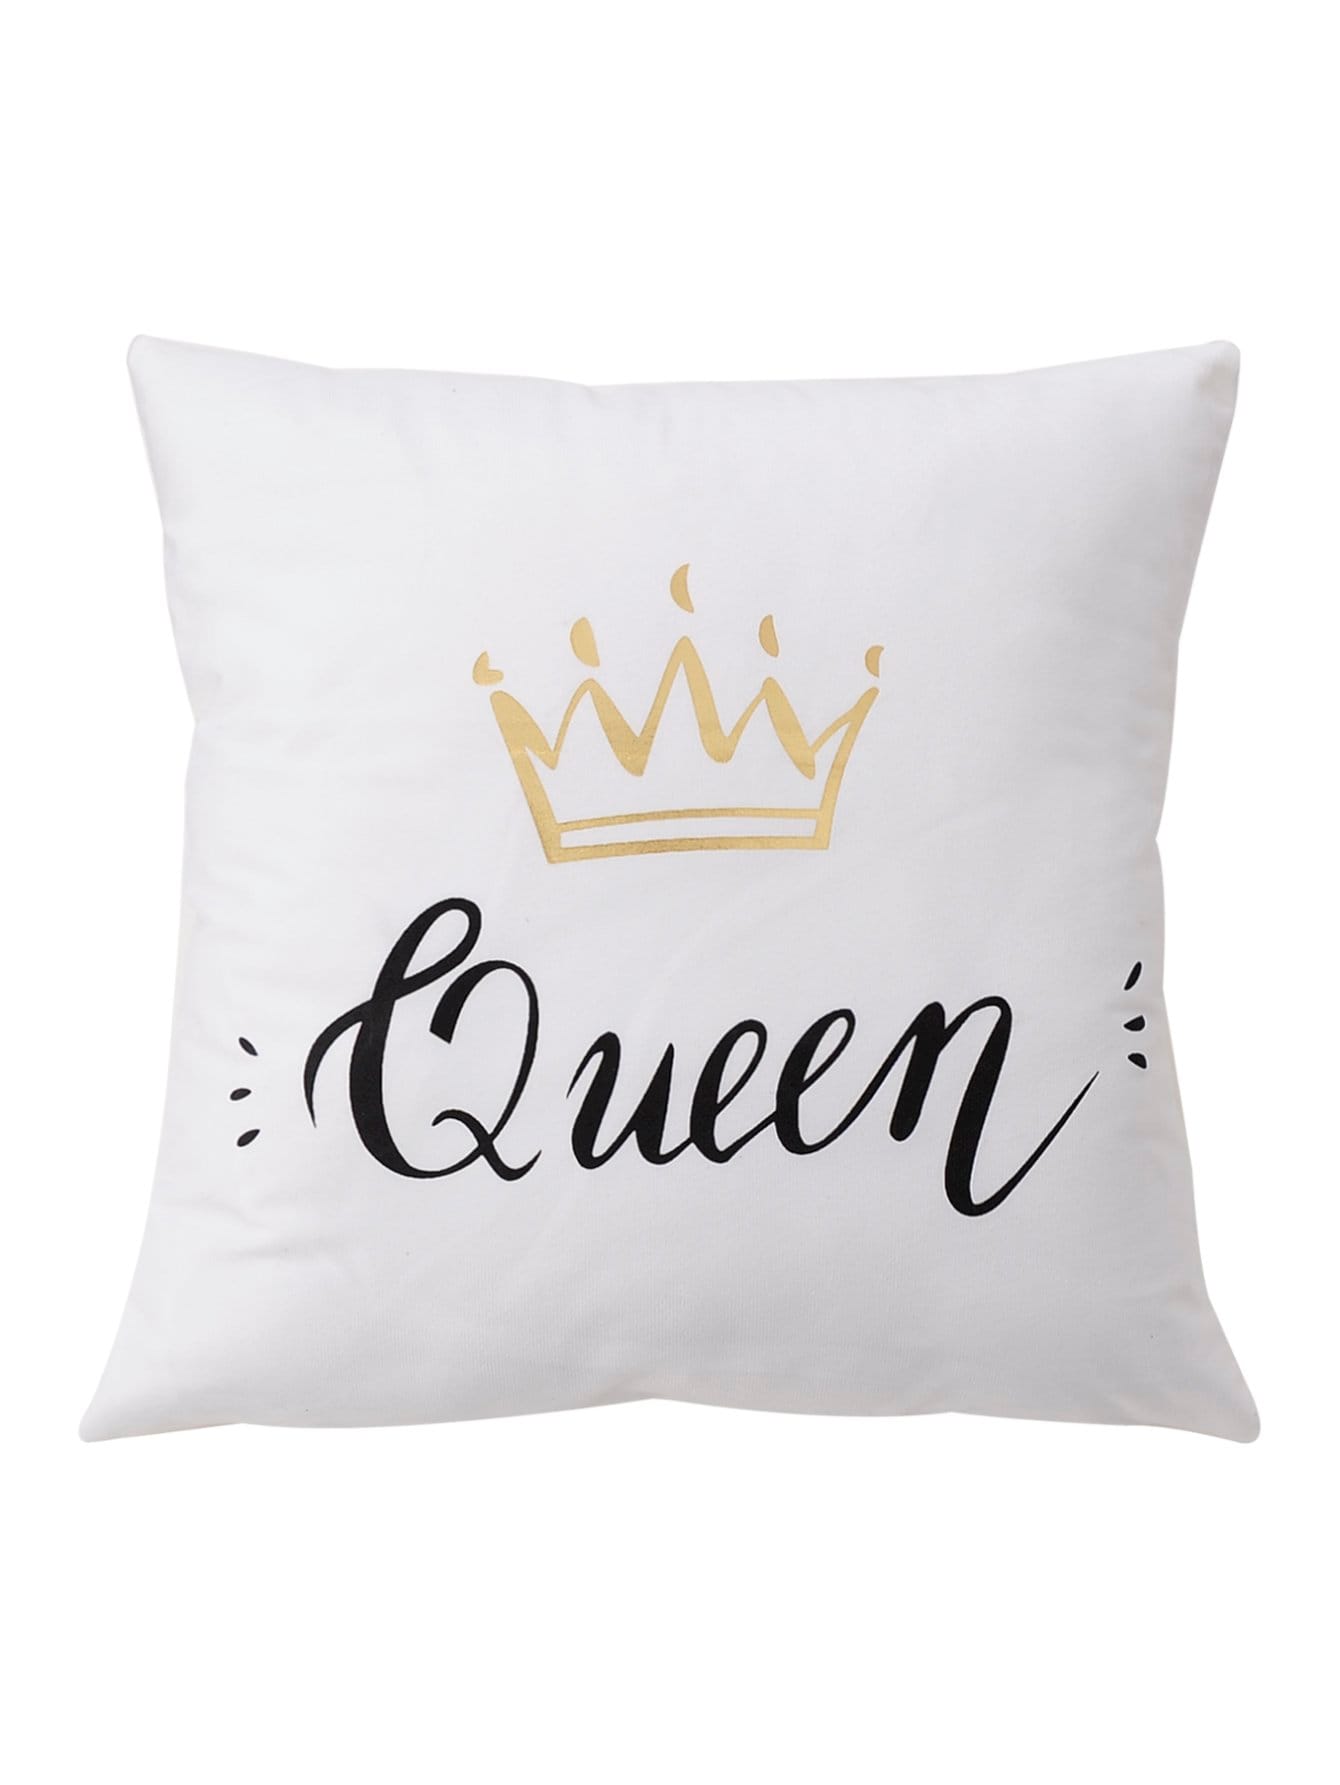 Letter & Crown Pattern Cushion Cover